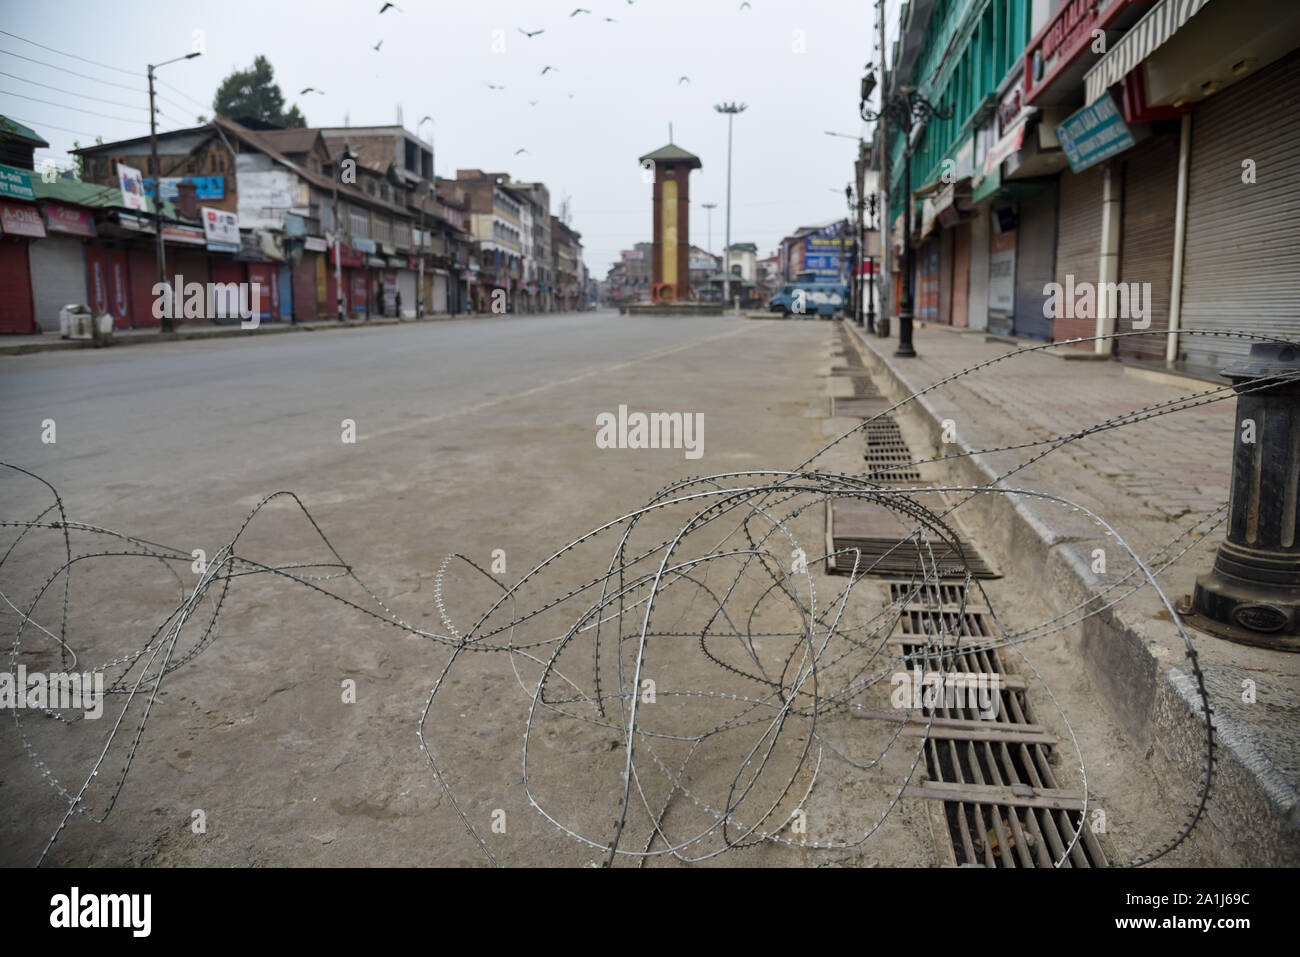 Srinagar, Kashmir. 27th Sep, 2019. Deserted street with concertina wire during the restrictions in Srinagar.After the revocation of article 370 which gives the special status to Jammu & Kashmir, state authorities have imposed restrictions across Kashmir to prevent protests. Credit: SOPA Images Limited/Alamy Live News Stock Photo